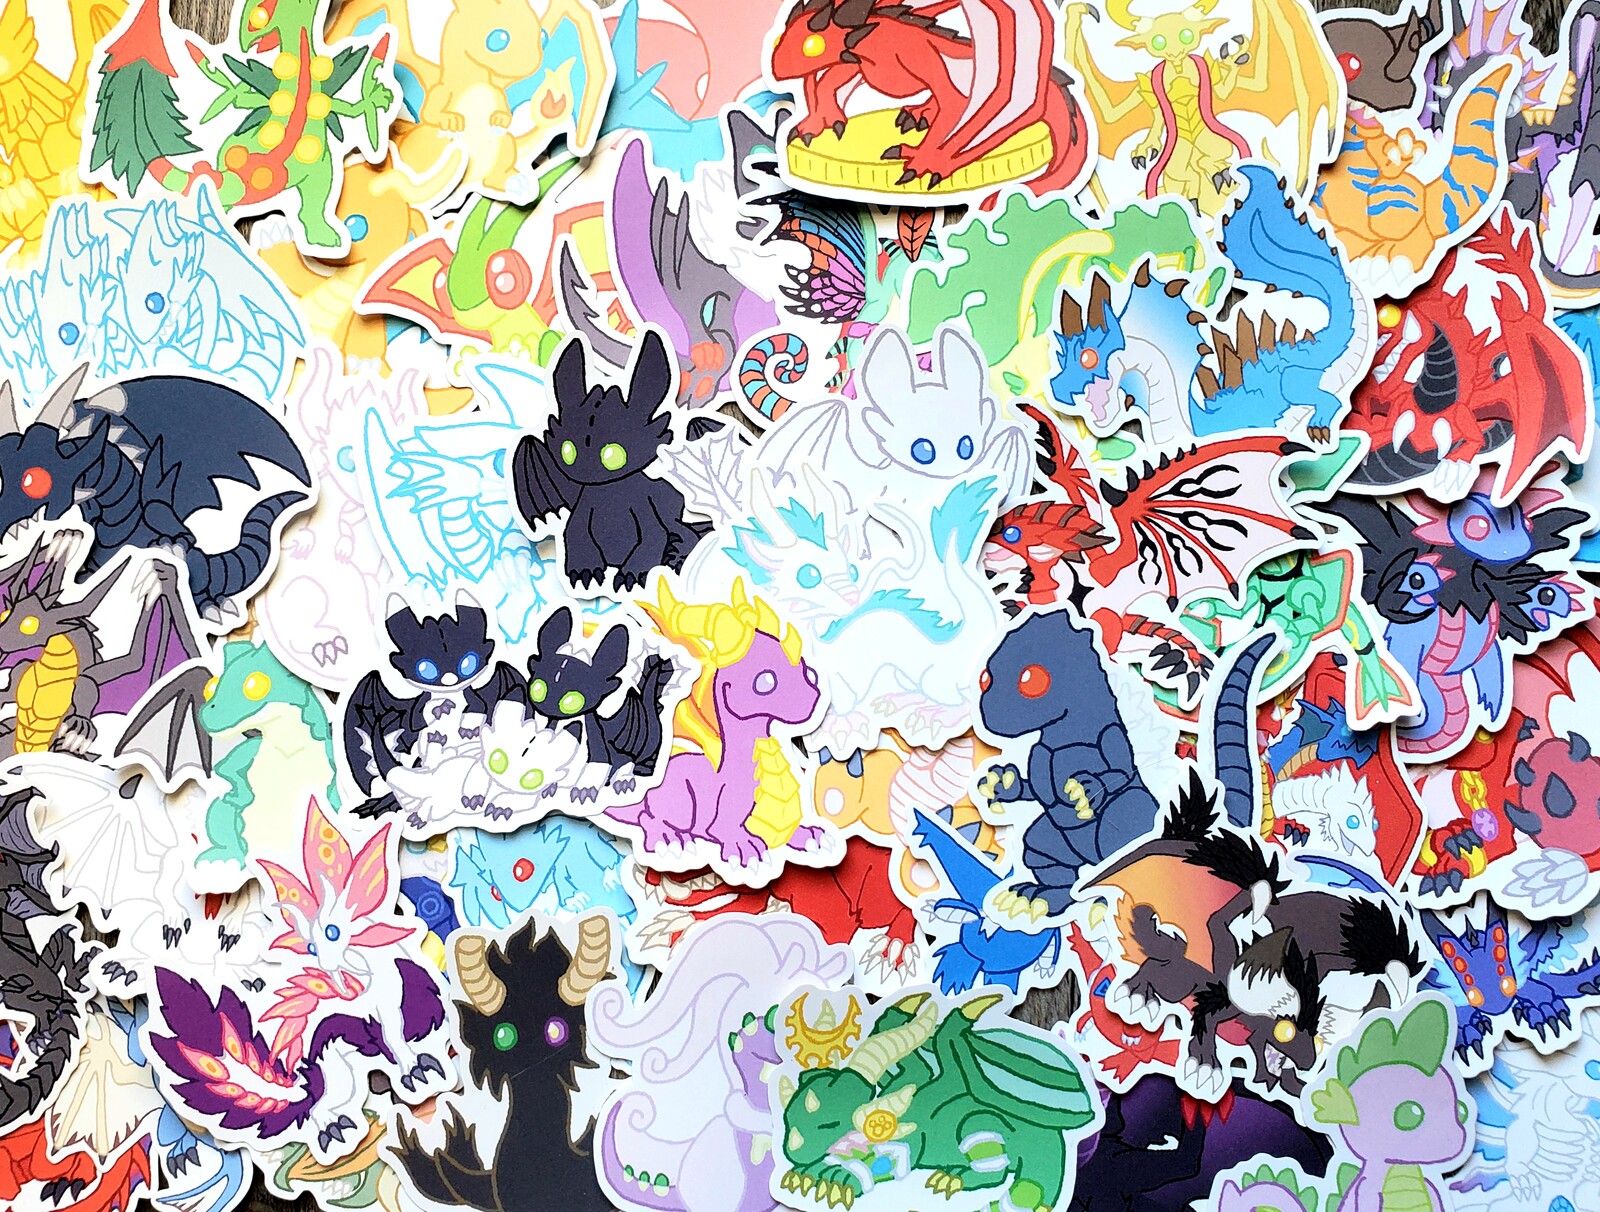 Vinyl stickers of a variety of dragons from different series. 128 total designs available.